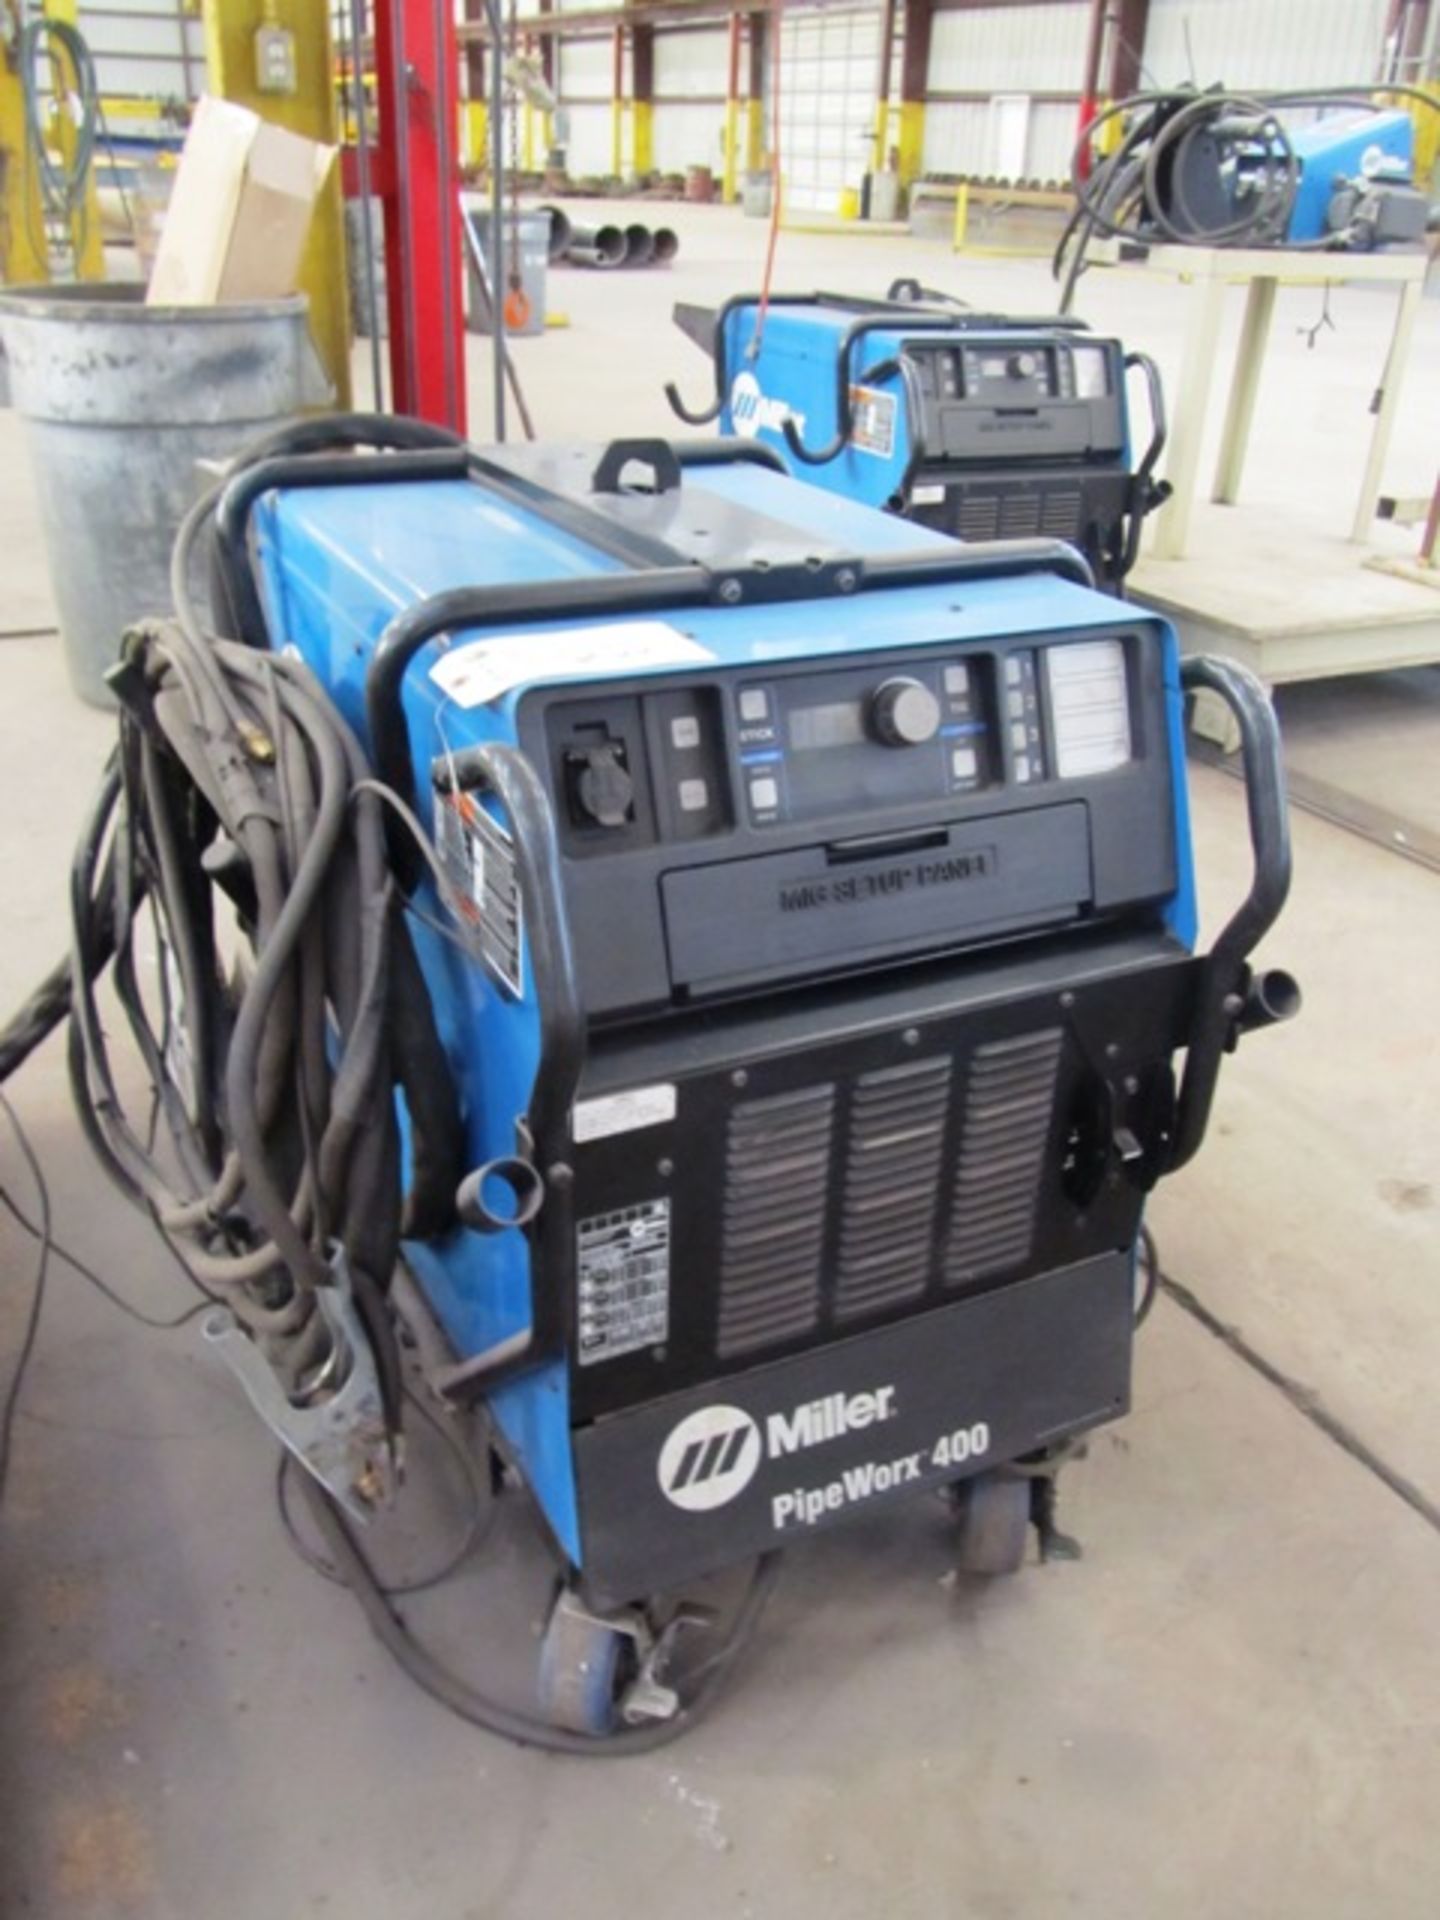 Miller PipeWorx 400 Portable Mig Welder with Miller PipeWorx Dual Wire Feeder, sn:MD150358G